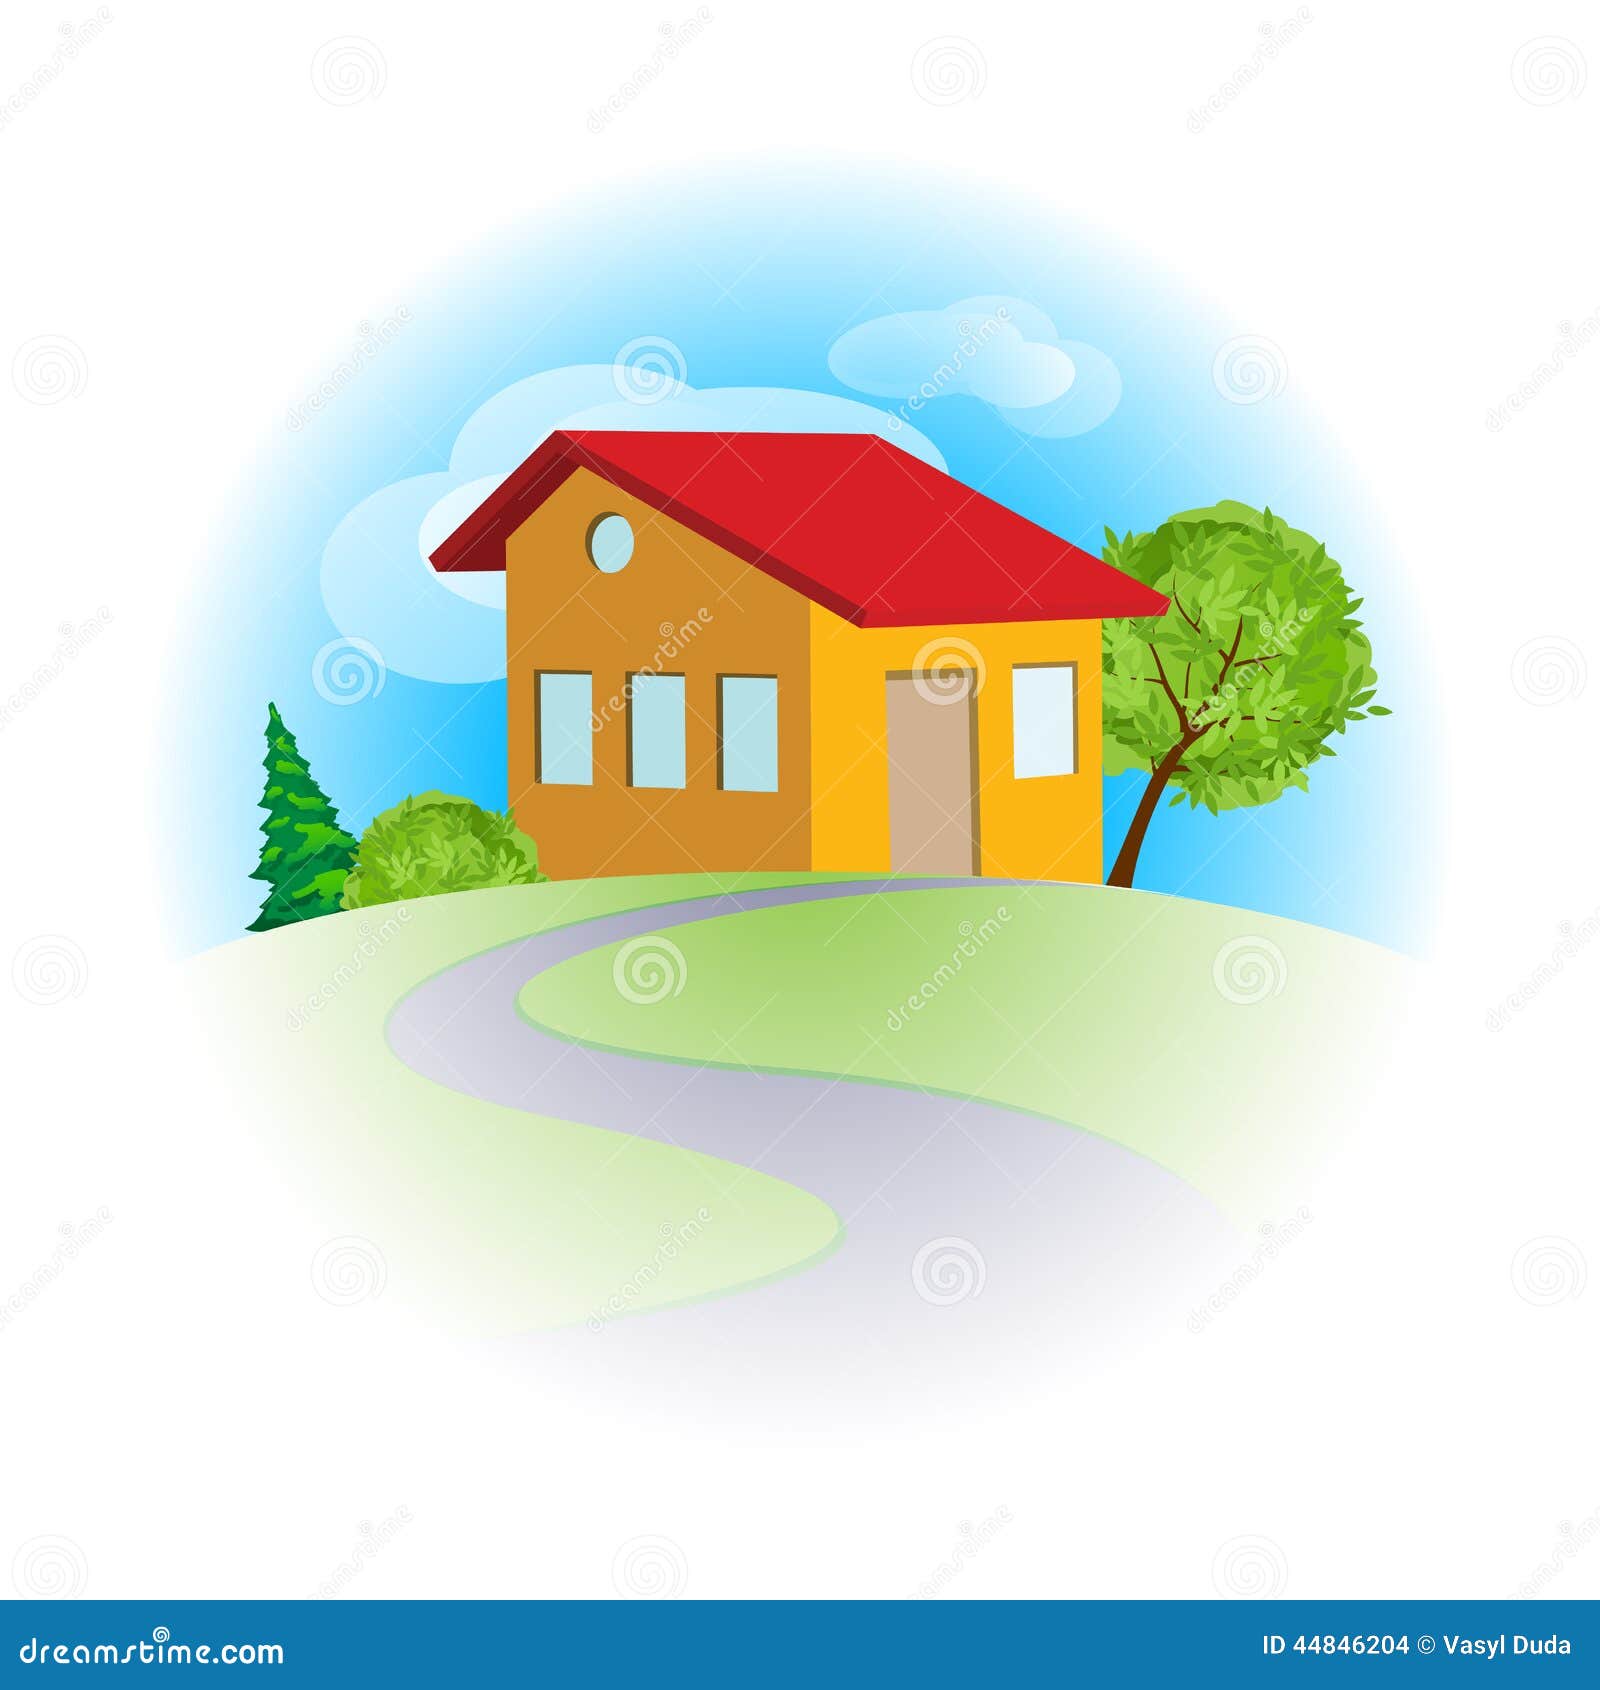 Home Sweet Home stock vector. Illustration of background - 44846204